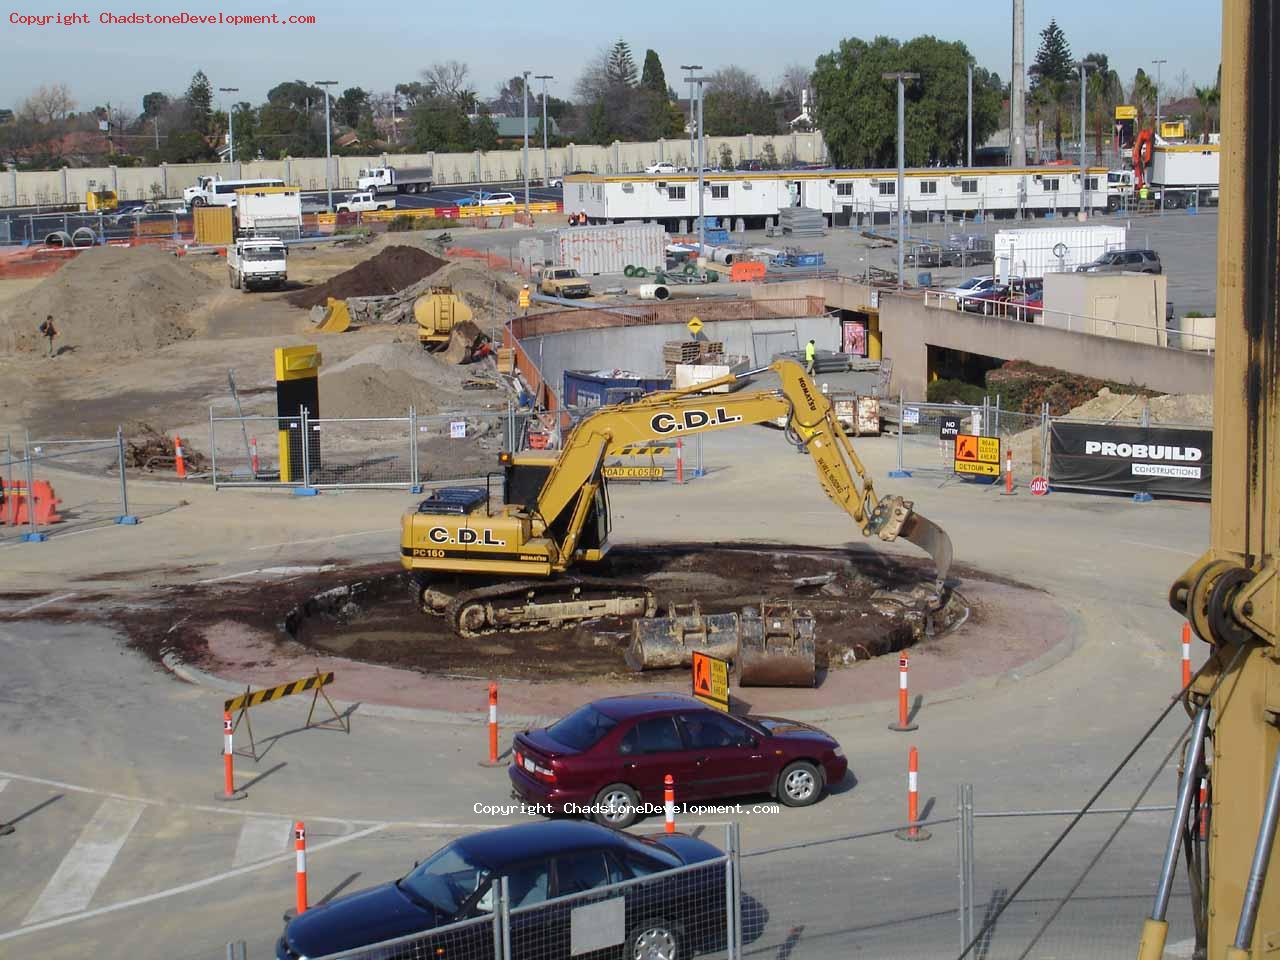 Digging up the roundabout - Chadstone Development Discussions